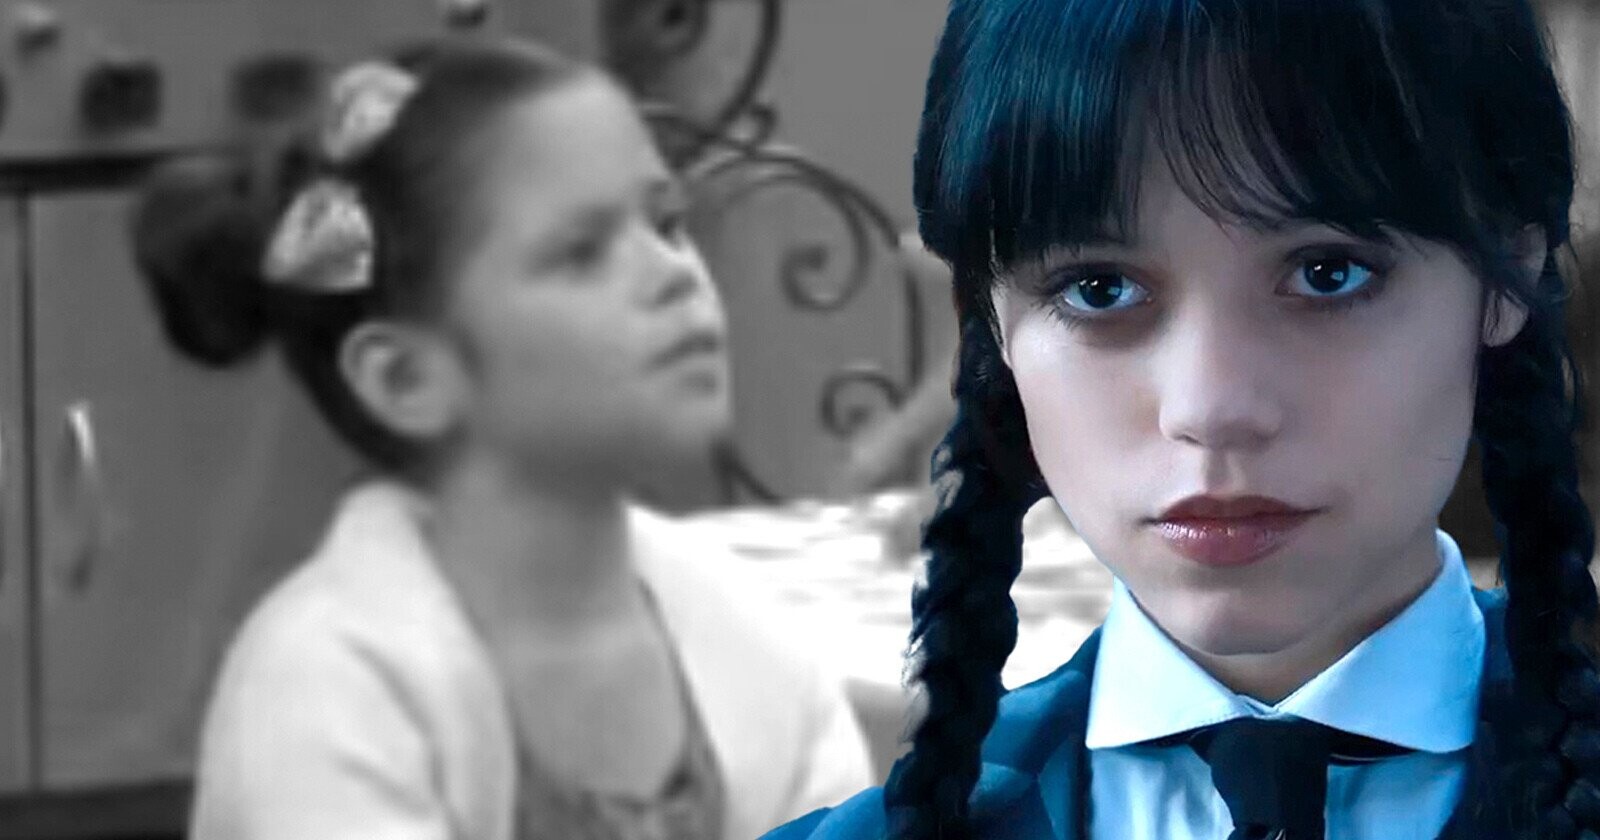 The First Monster Series Jenna Ortega Starred in Was Rob Schneider’s Sitcom